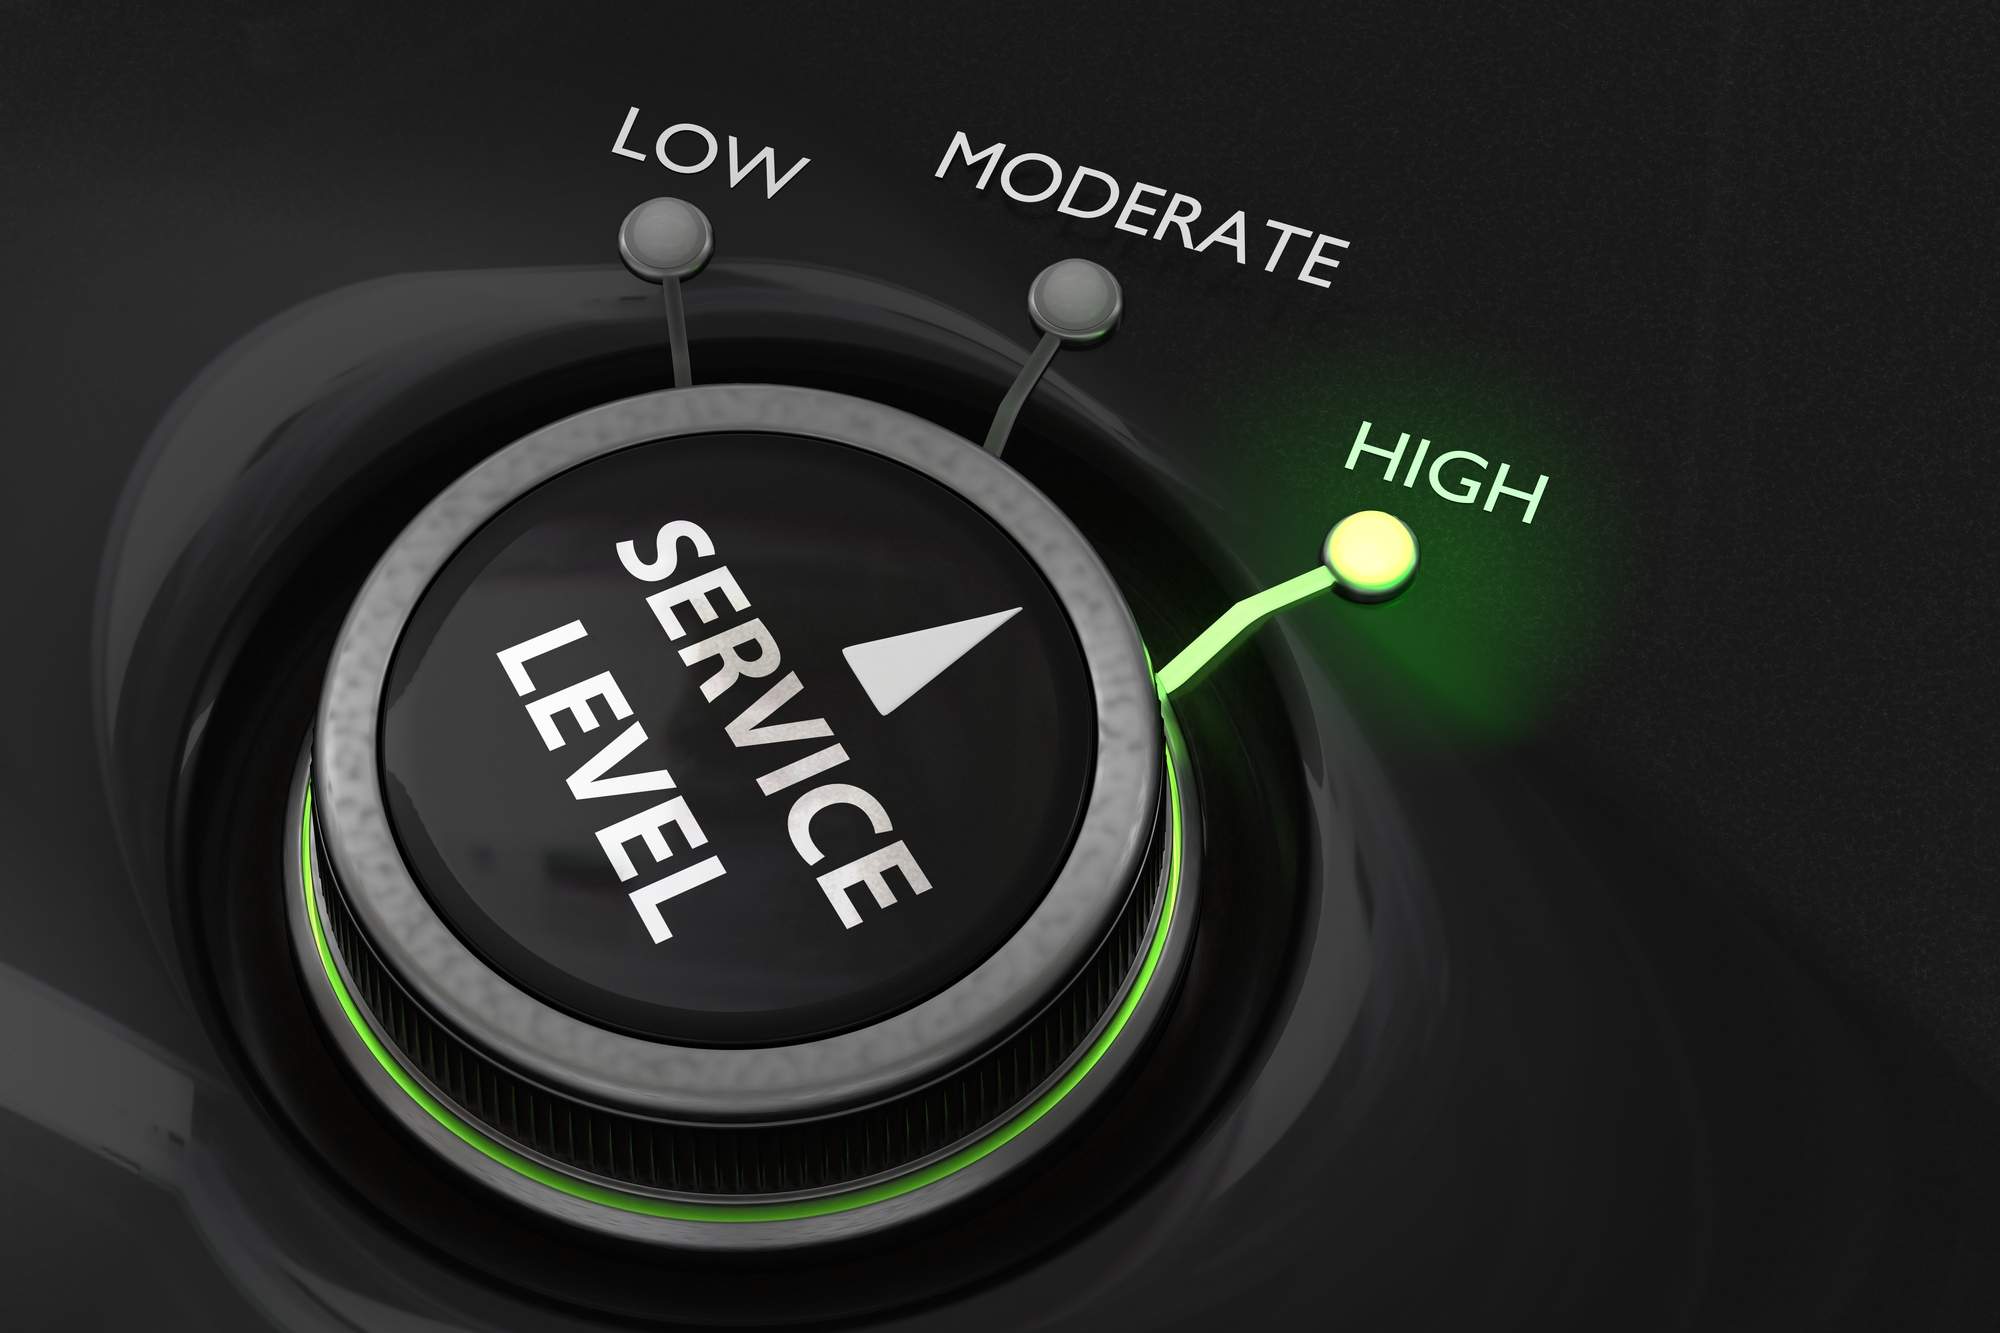 Service Level Agreements concept rendered as button with three settings